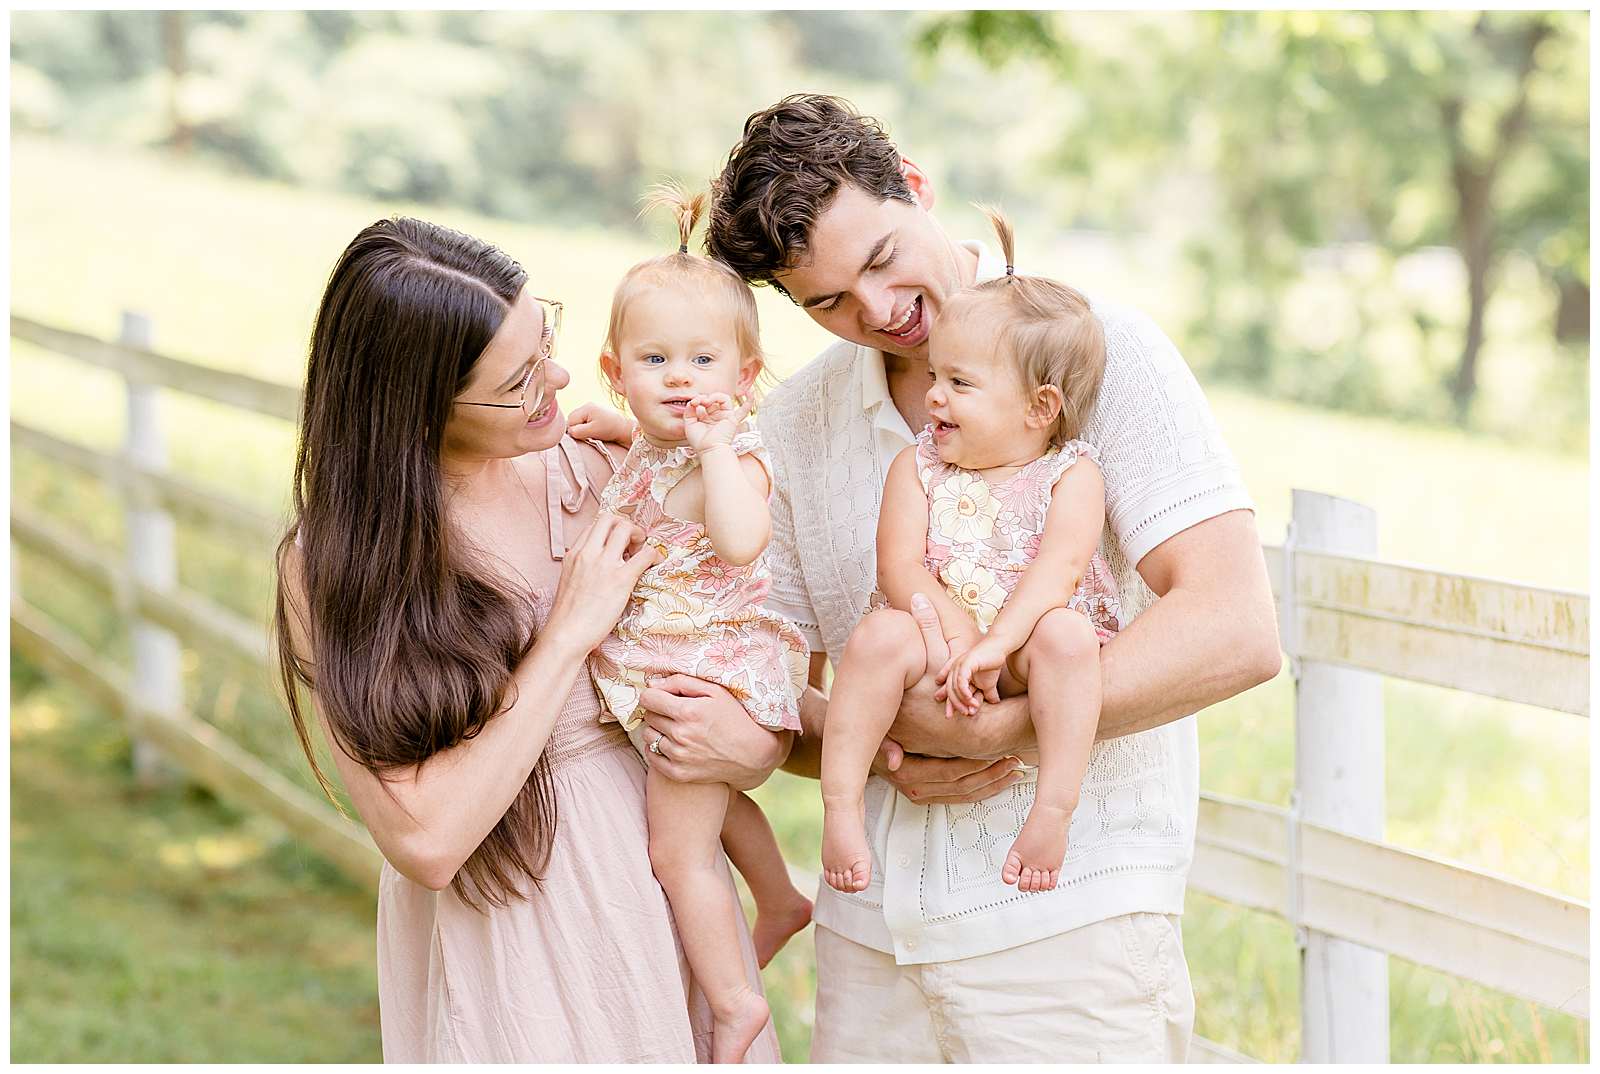 Family with 1 year old twins stand in front of a white fence surrounded by green grass while Mom and Dad each hold a daughter and they look at each other and smile. They coordinate in blush, cream, and muted pink tone colors. Click to see more on the blog! -rebeccaricephoto.com